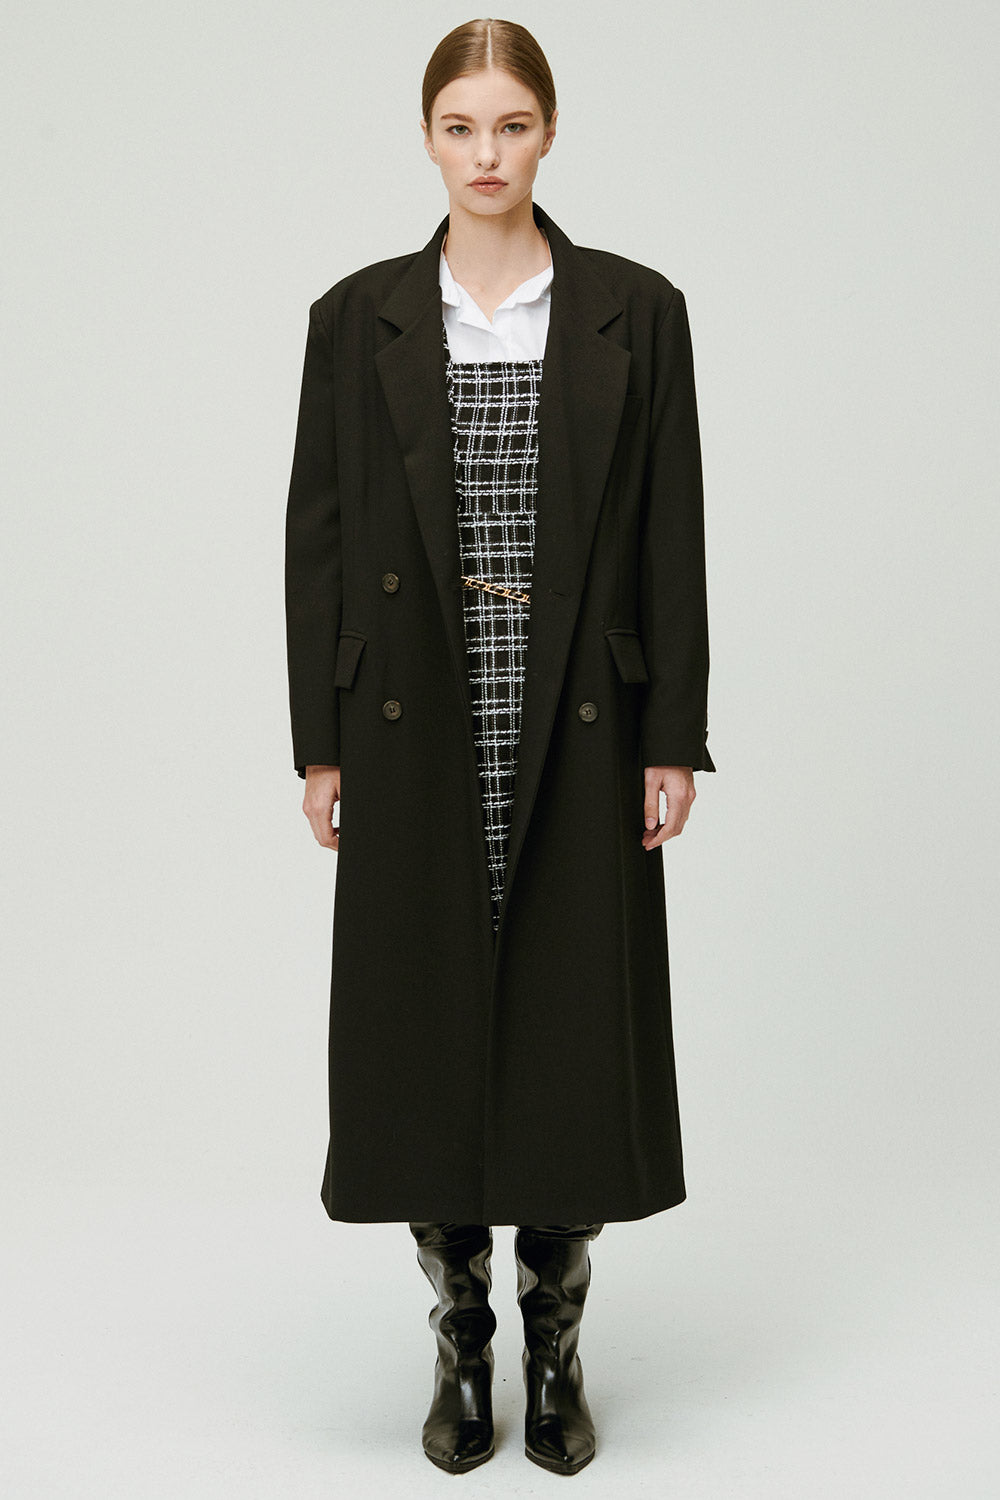 storets.com Marie Double Breasted Coat